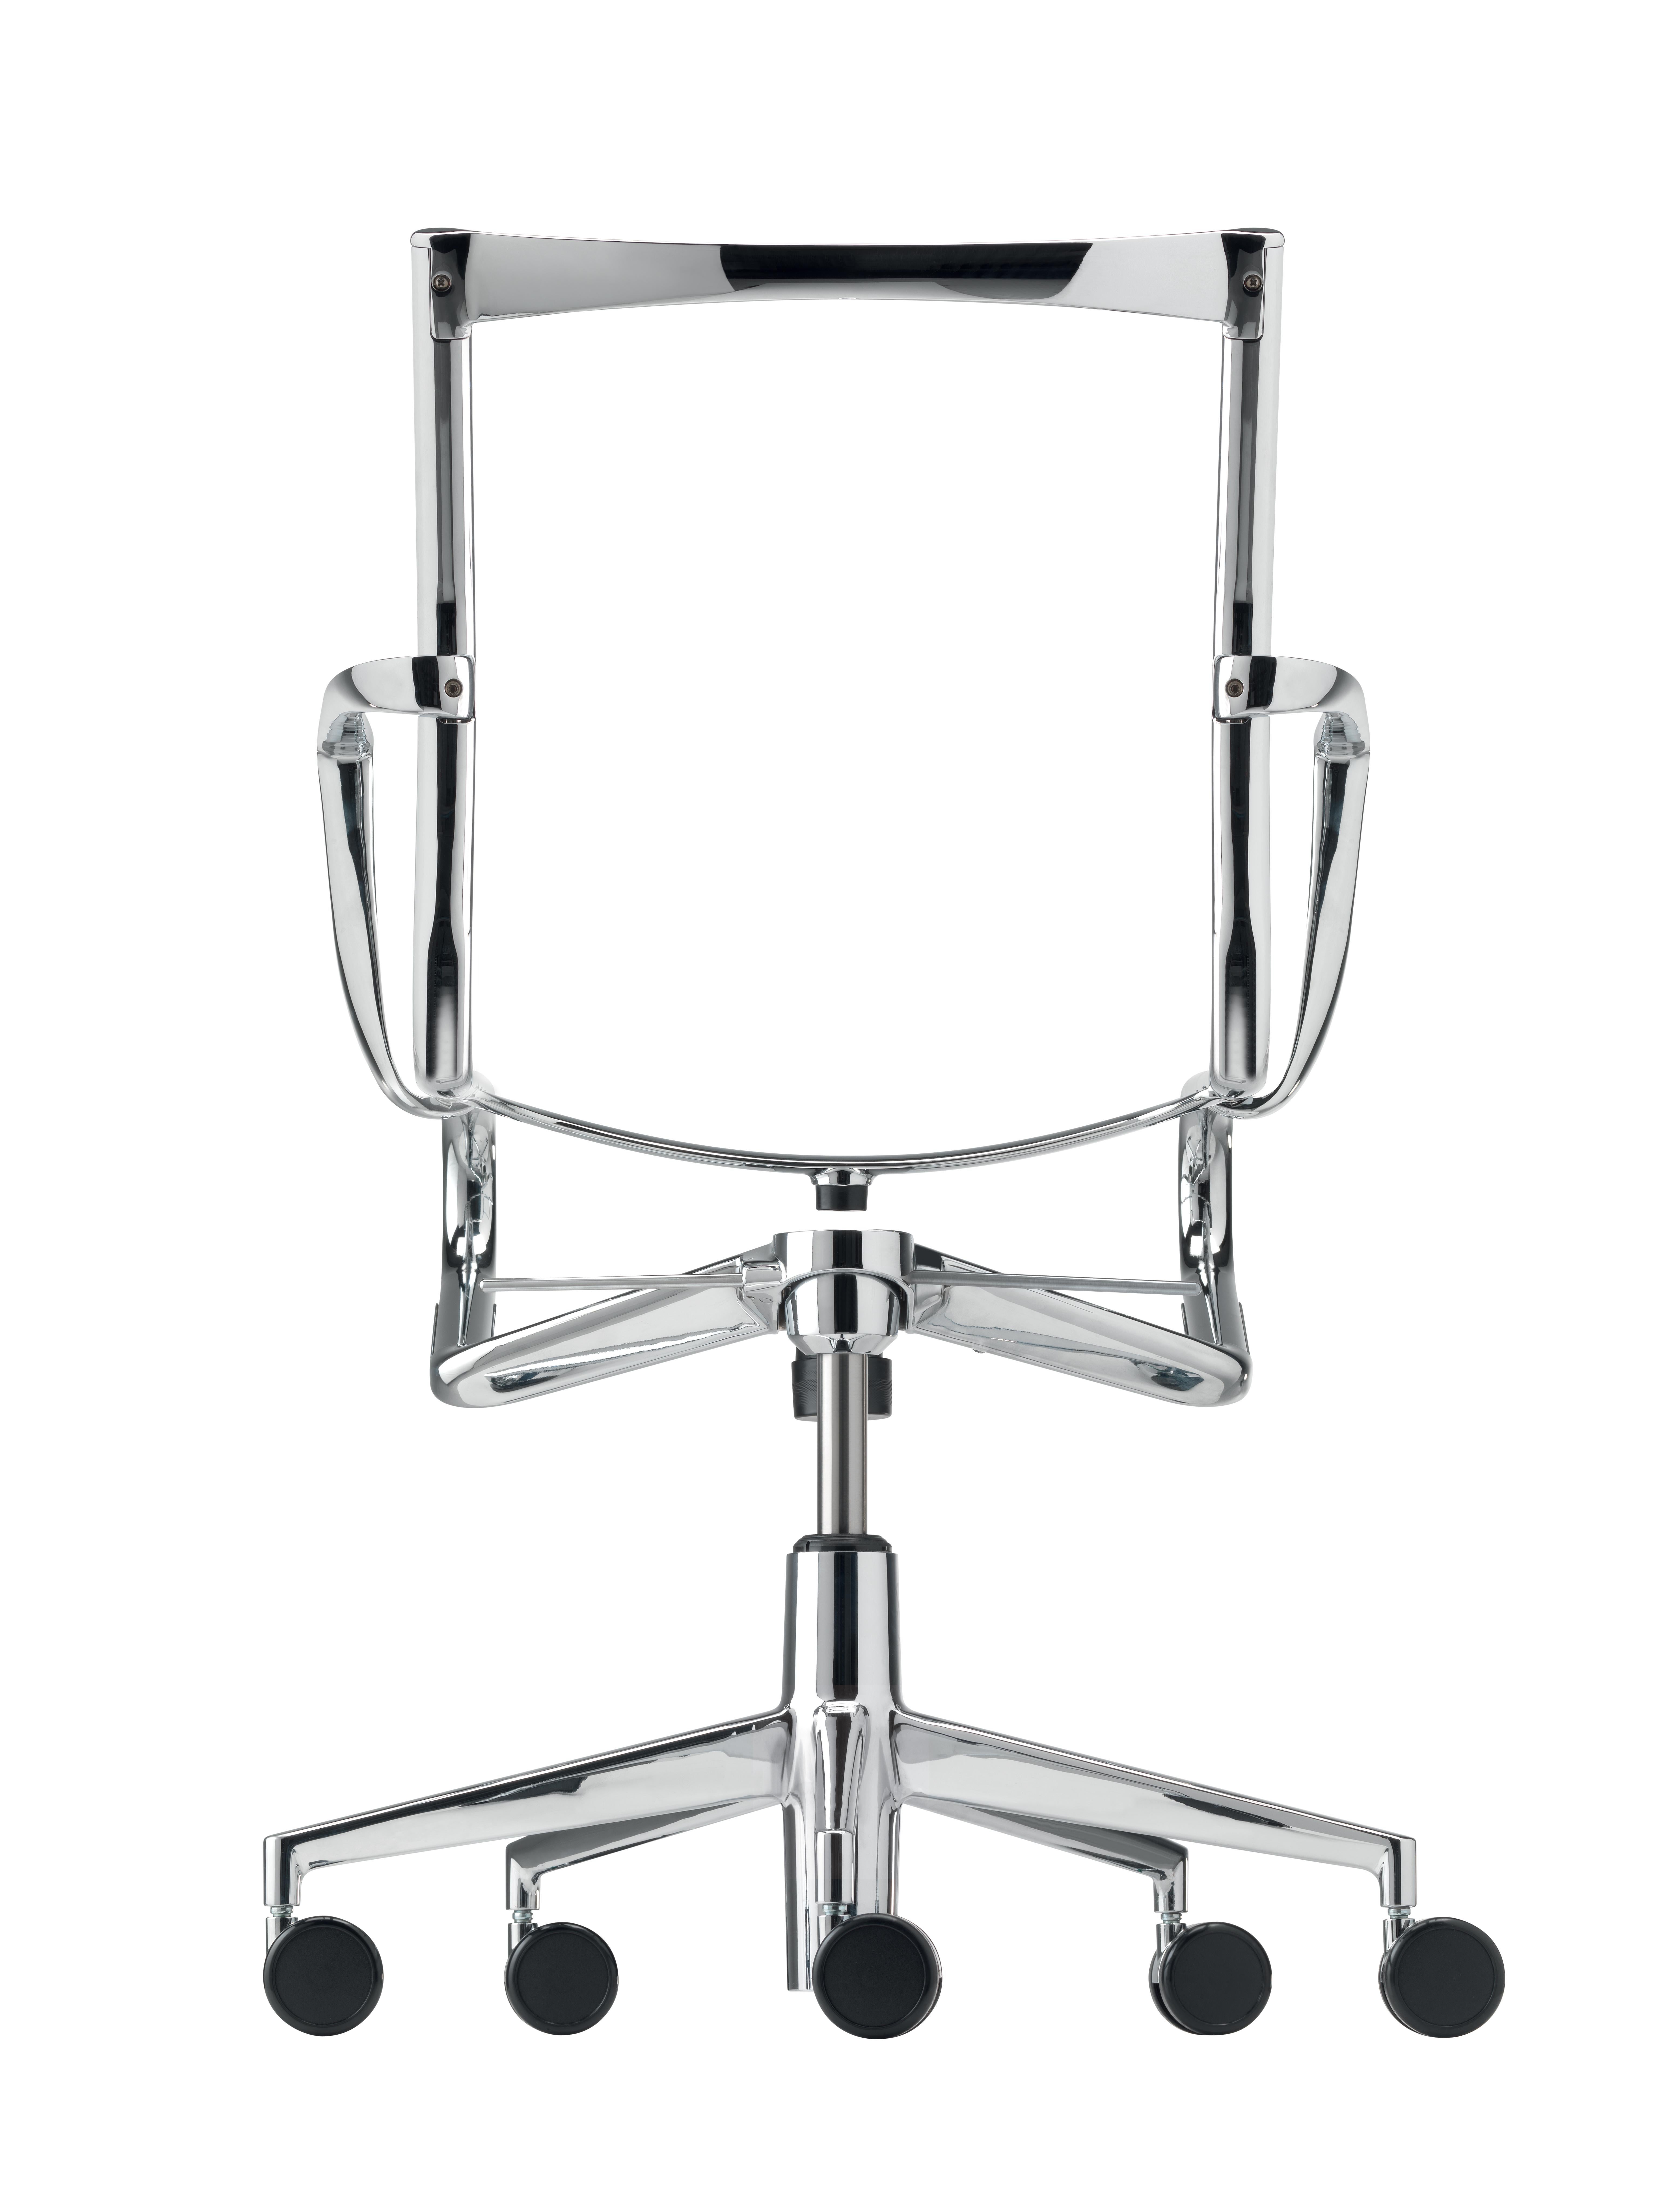 Alias 445 Rollingframe+ Tilt 47 Chair in White Mesh with Chromed Aluminium Frame by Alberto Meda

Height adjustable chair with arms, with soft (or hard or soft breaking ***) castors and 5-star swivel base with tilting mechanism. Structure made of